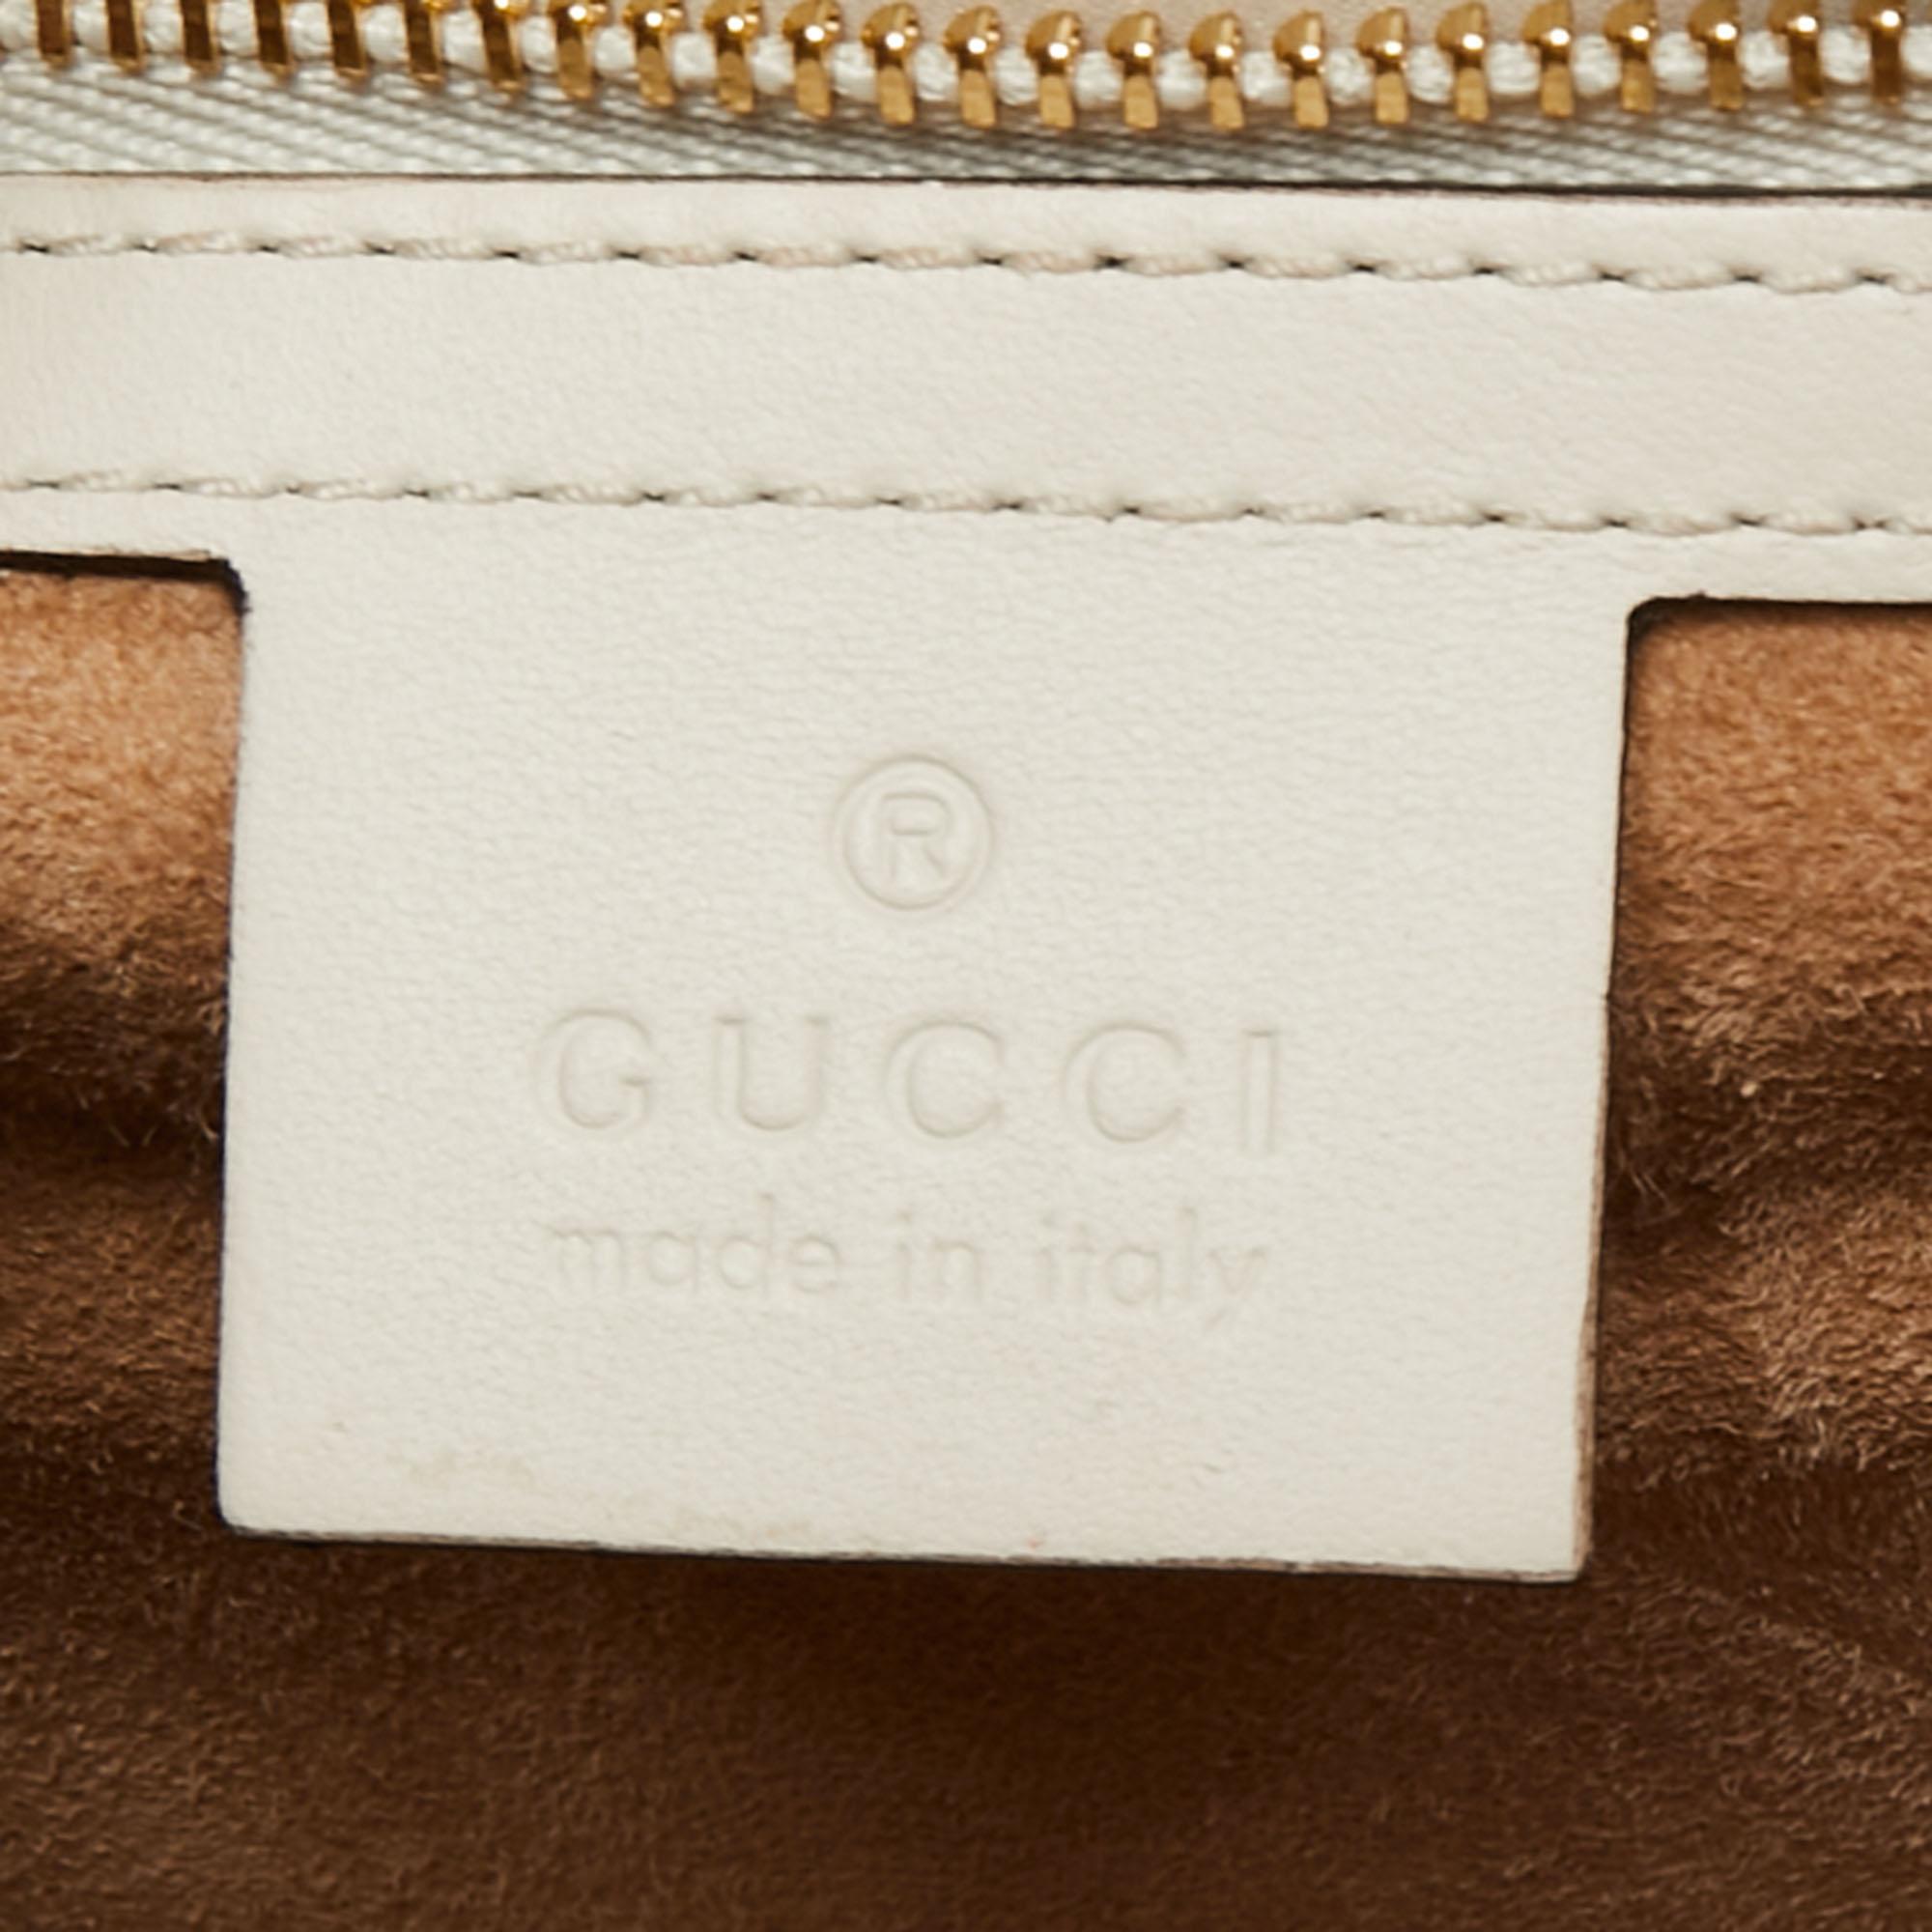 Gucci White Leather Sylvie Small Shoulder Bag 4